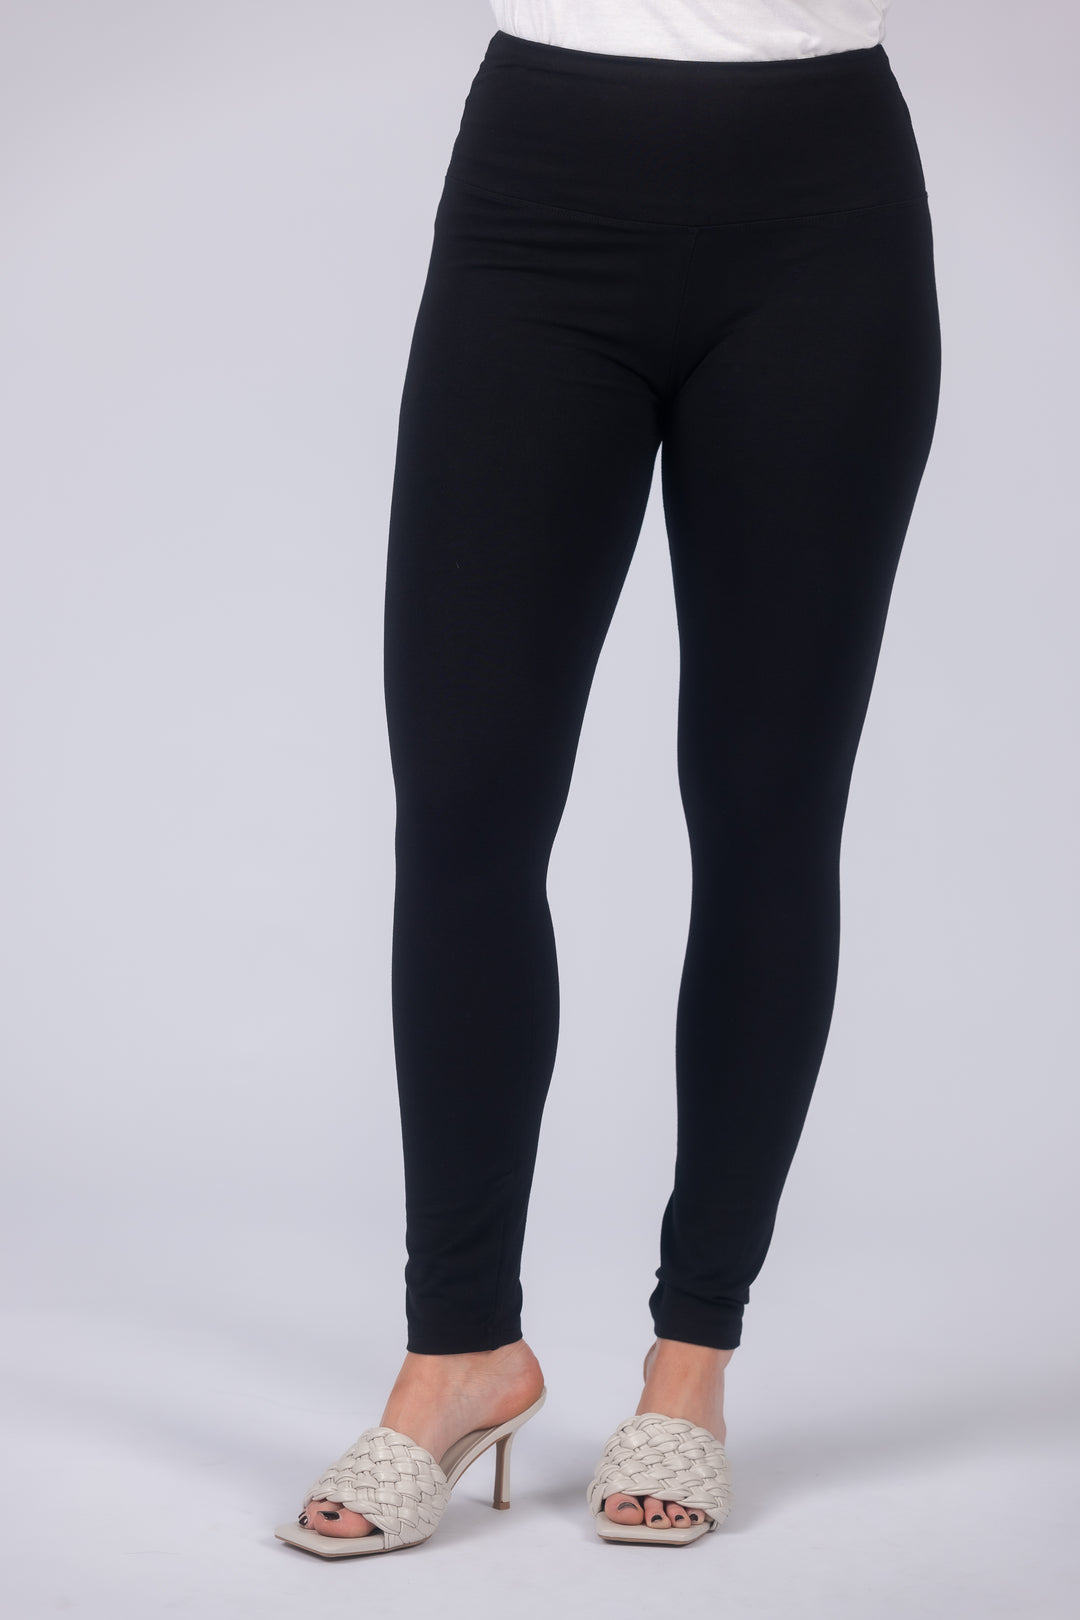 Leggings Clothing Fit – Intro Love Slimming Pull-On the Intro